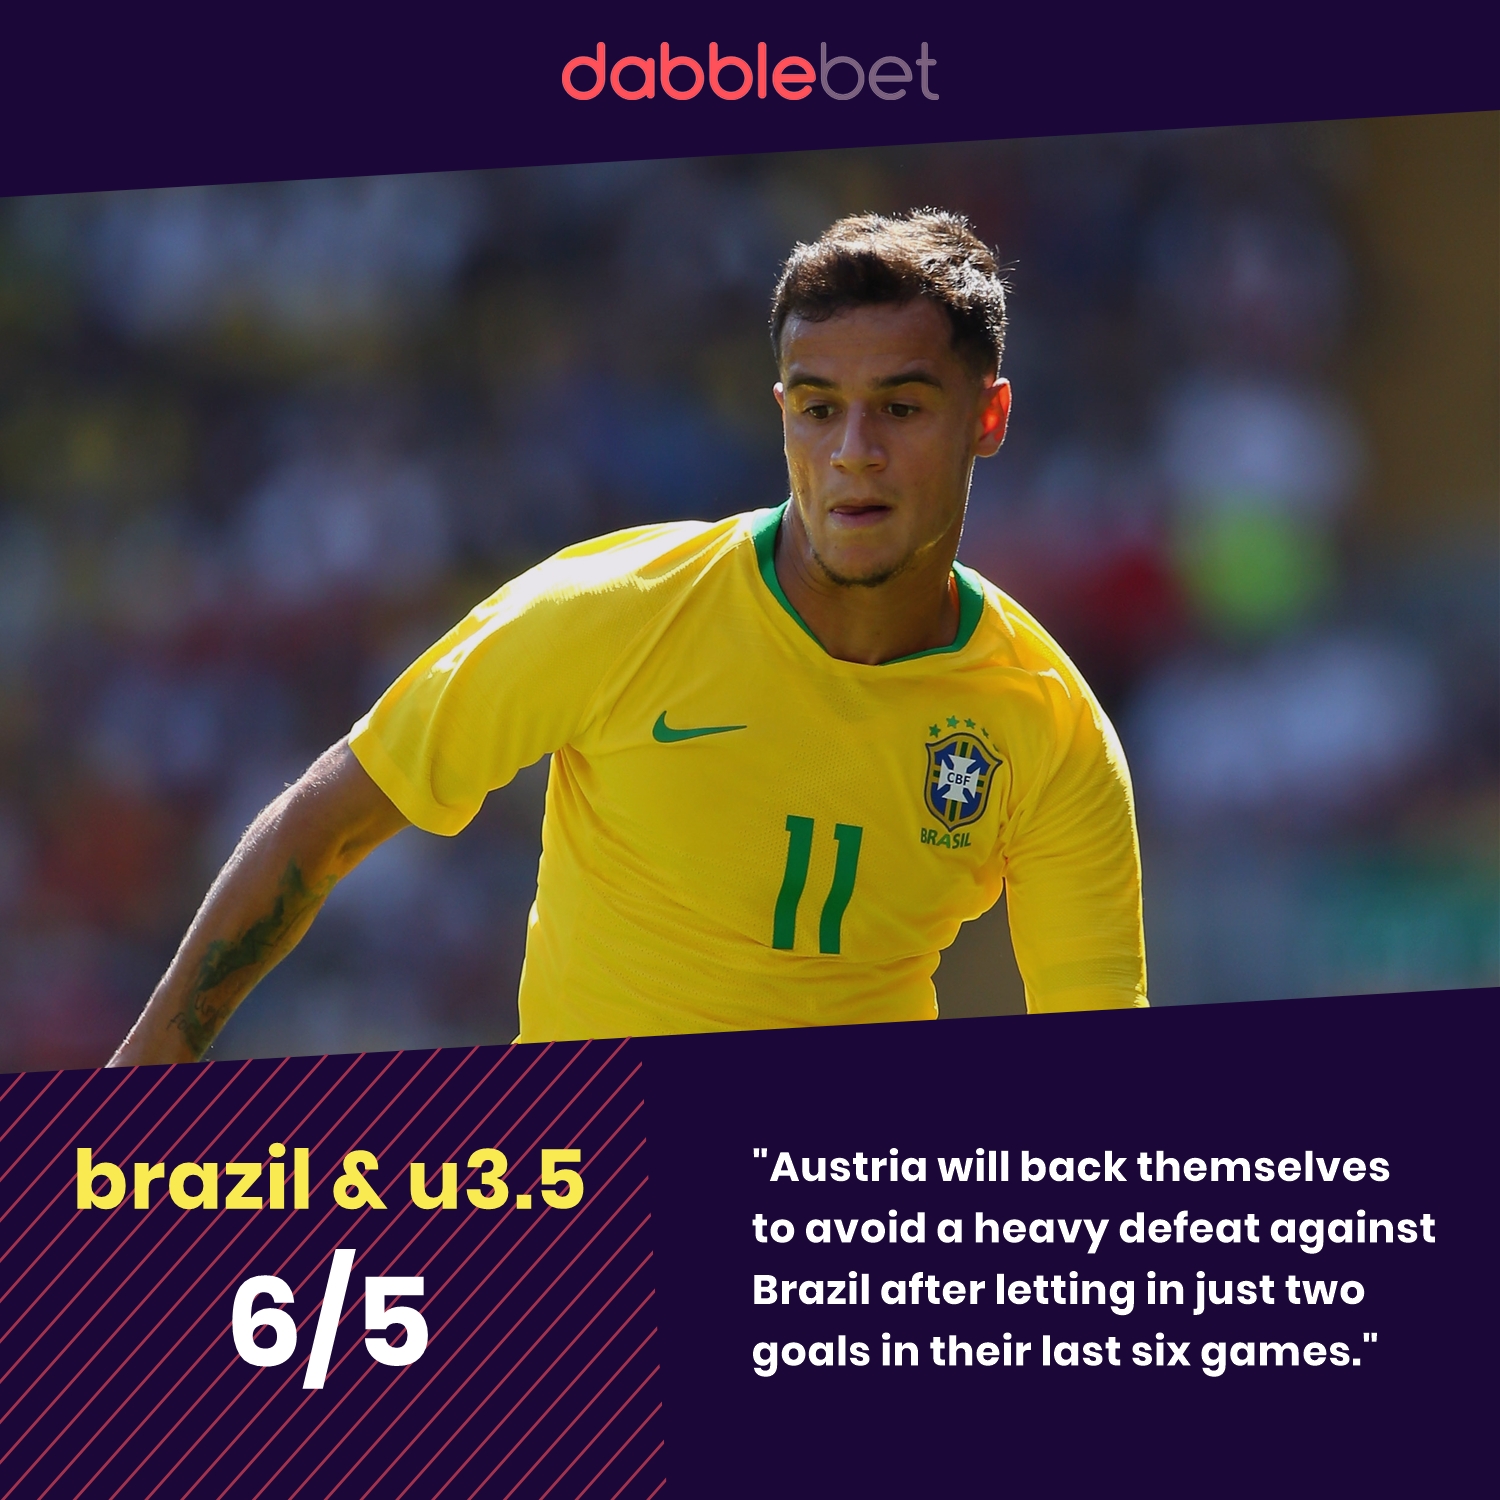 Austria brazil betting previews betting lines usa today